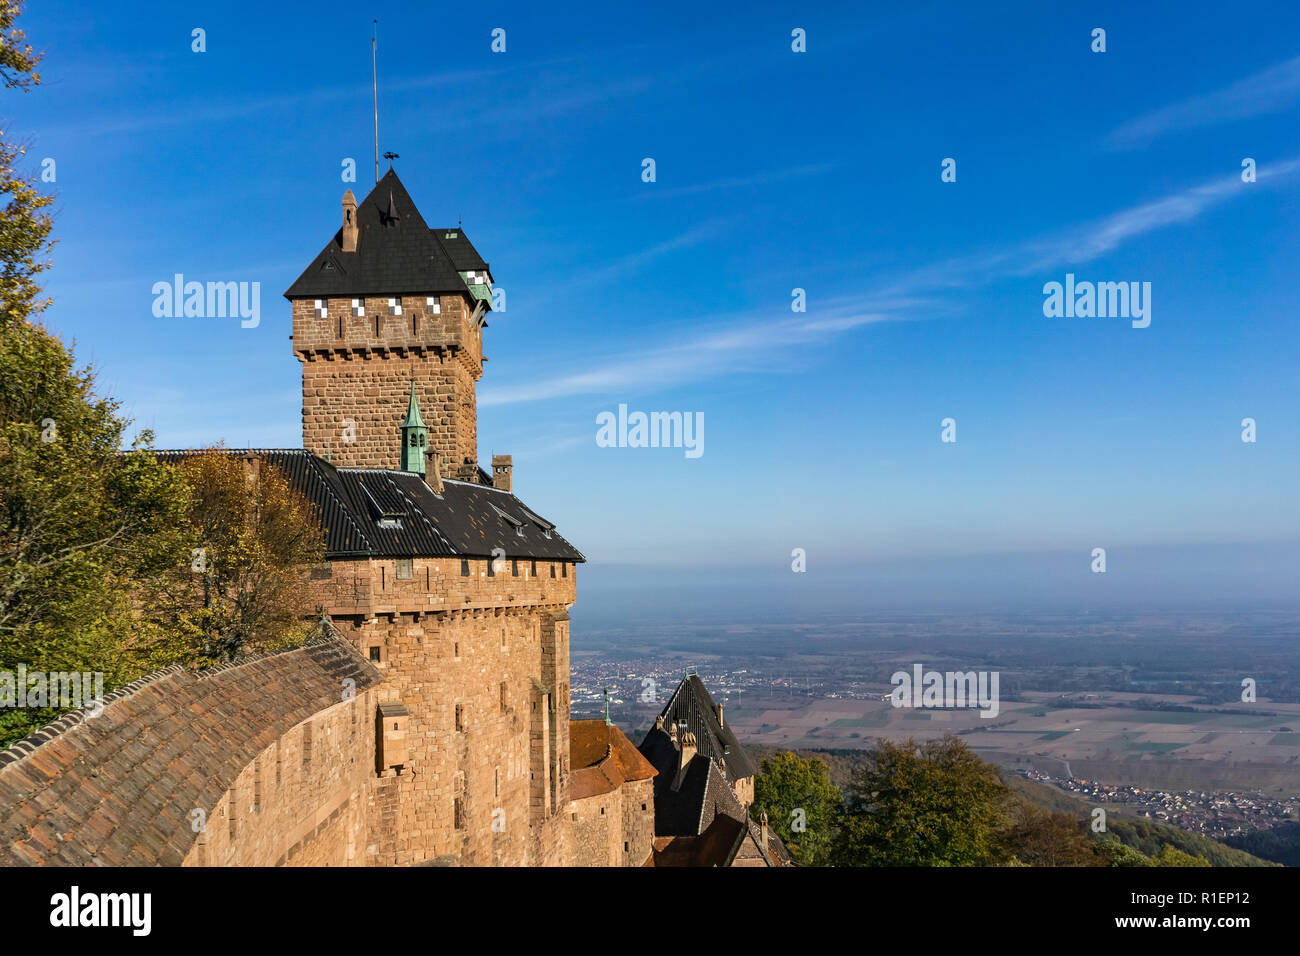 Haut-Koenigsbourg castle overlooking the plain of Alsace on a sunny day, France. Stock Photo